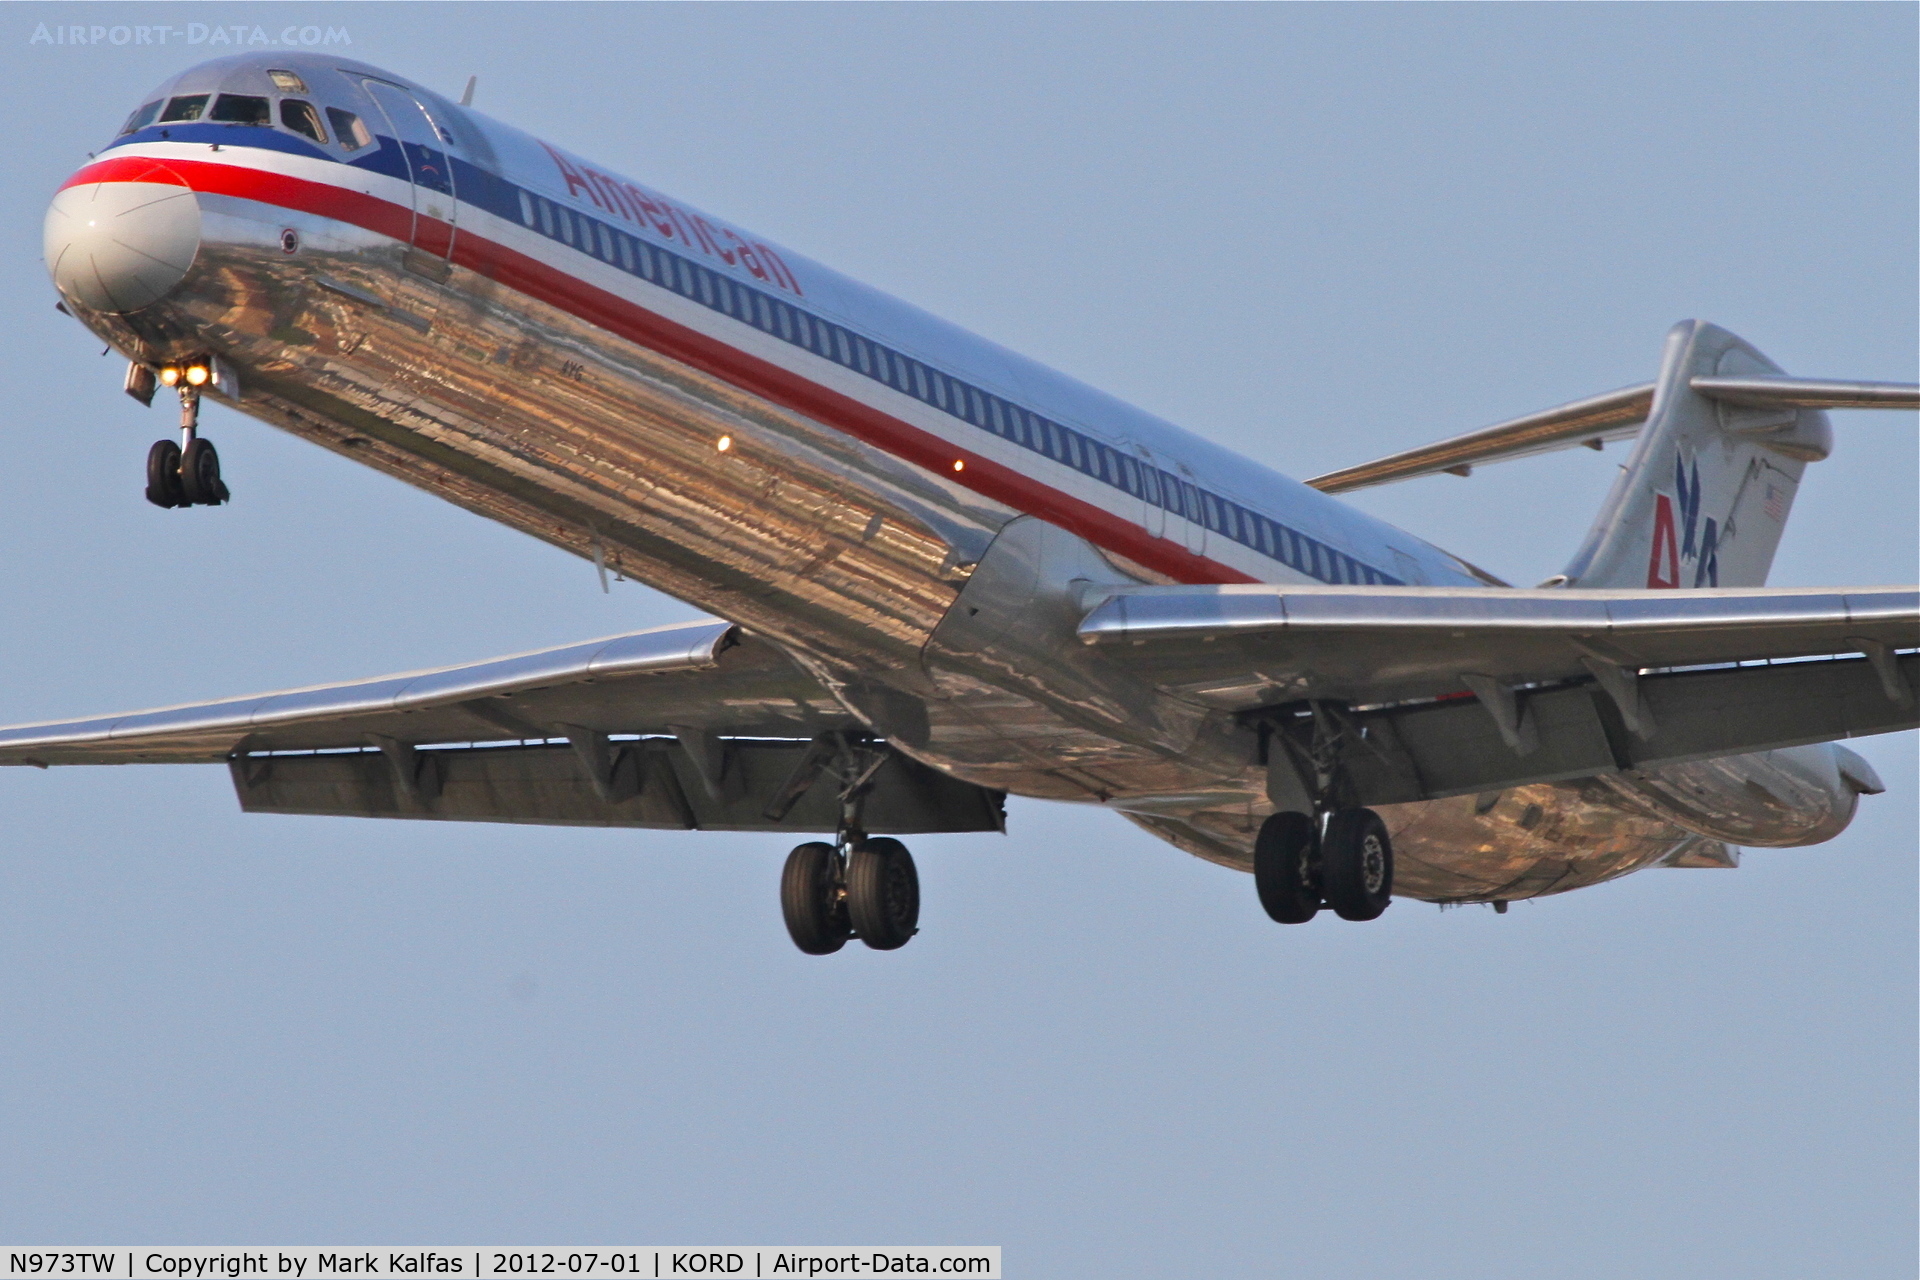 N973TW, 1999 McDonnell Douglas MD-83 (DC-9-83) C/N 53623, American Airlines Mcdonnell Douglas DC-9-83, AAL2356 arriving from Dallas-Fort Worth Int'l /KDFW, RWY 28 approach KORD.